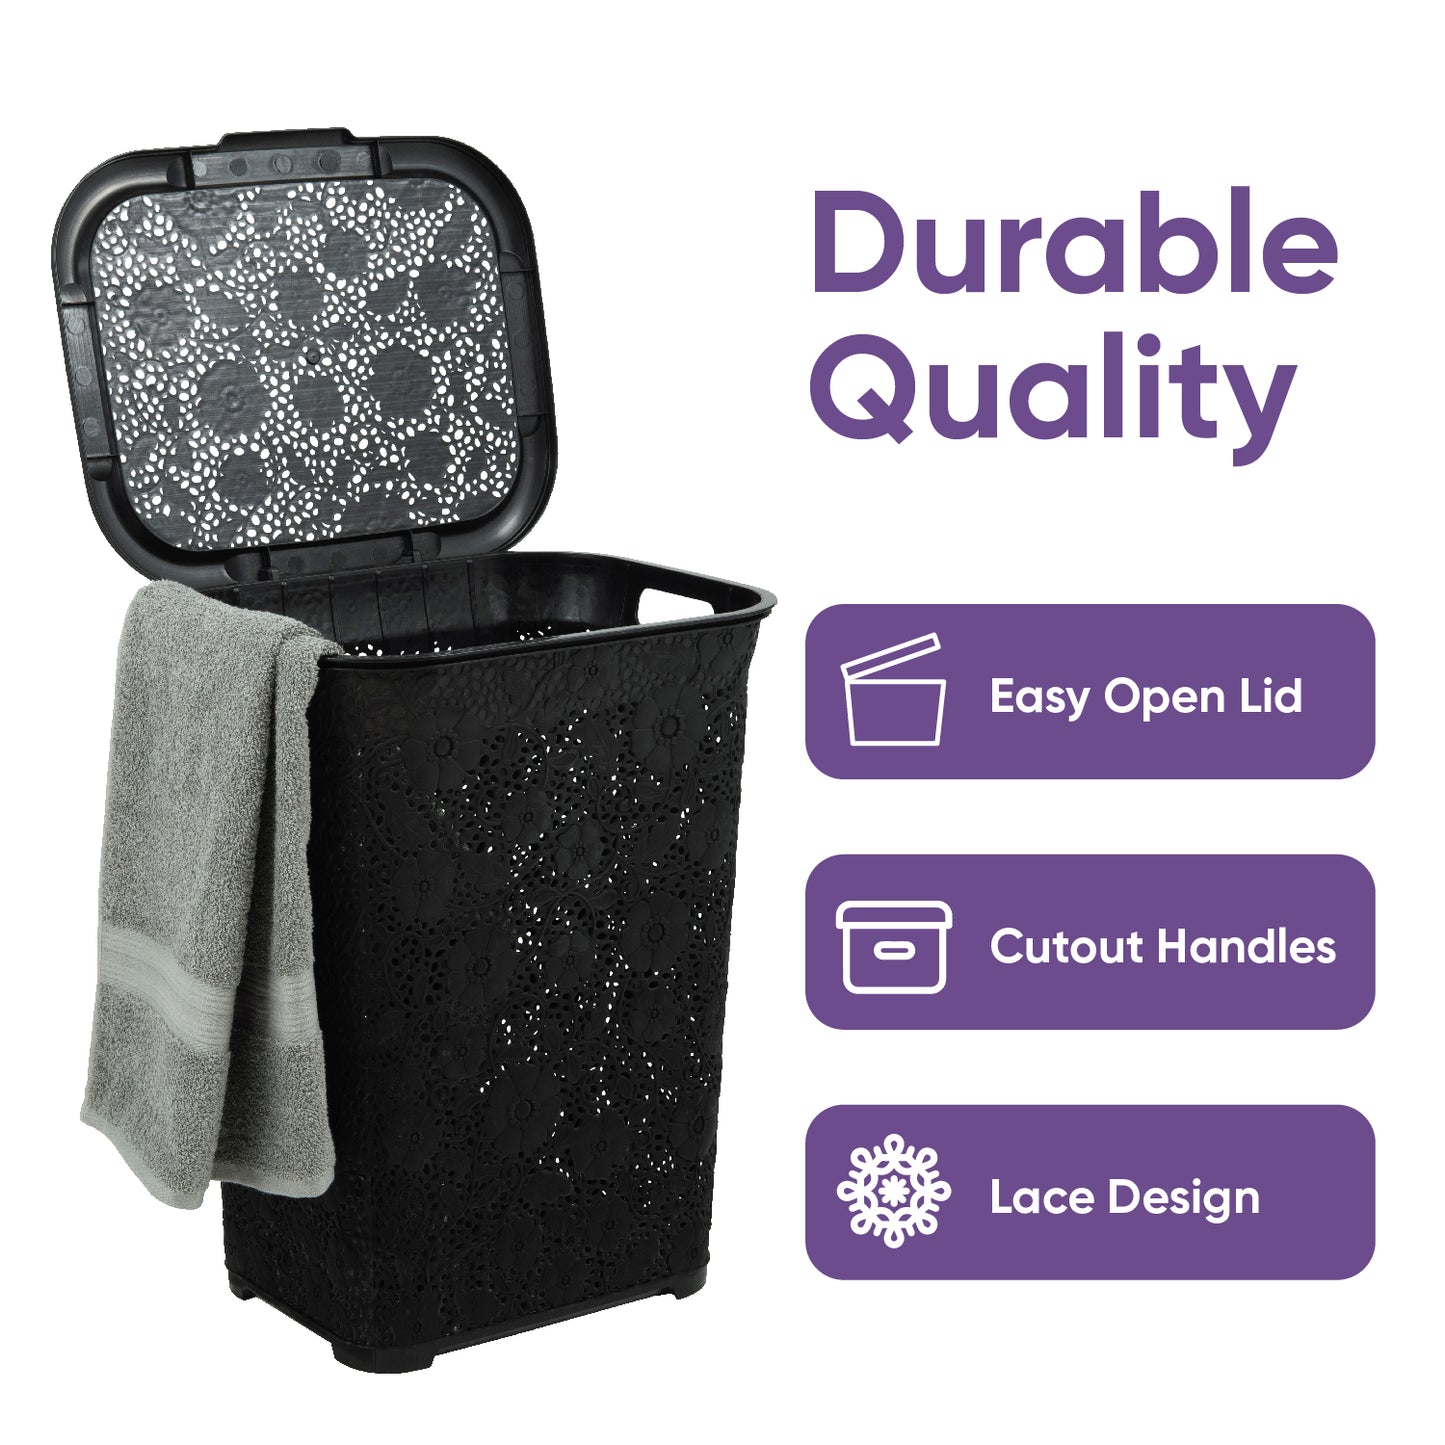 50 Liter Knit Style Laundry Hamper with Cutout Handles - Black